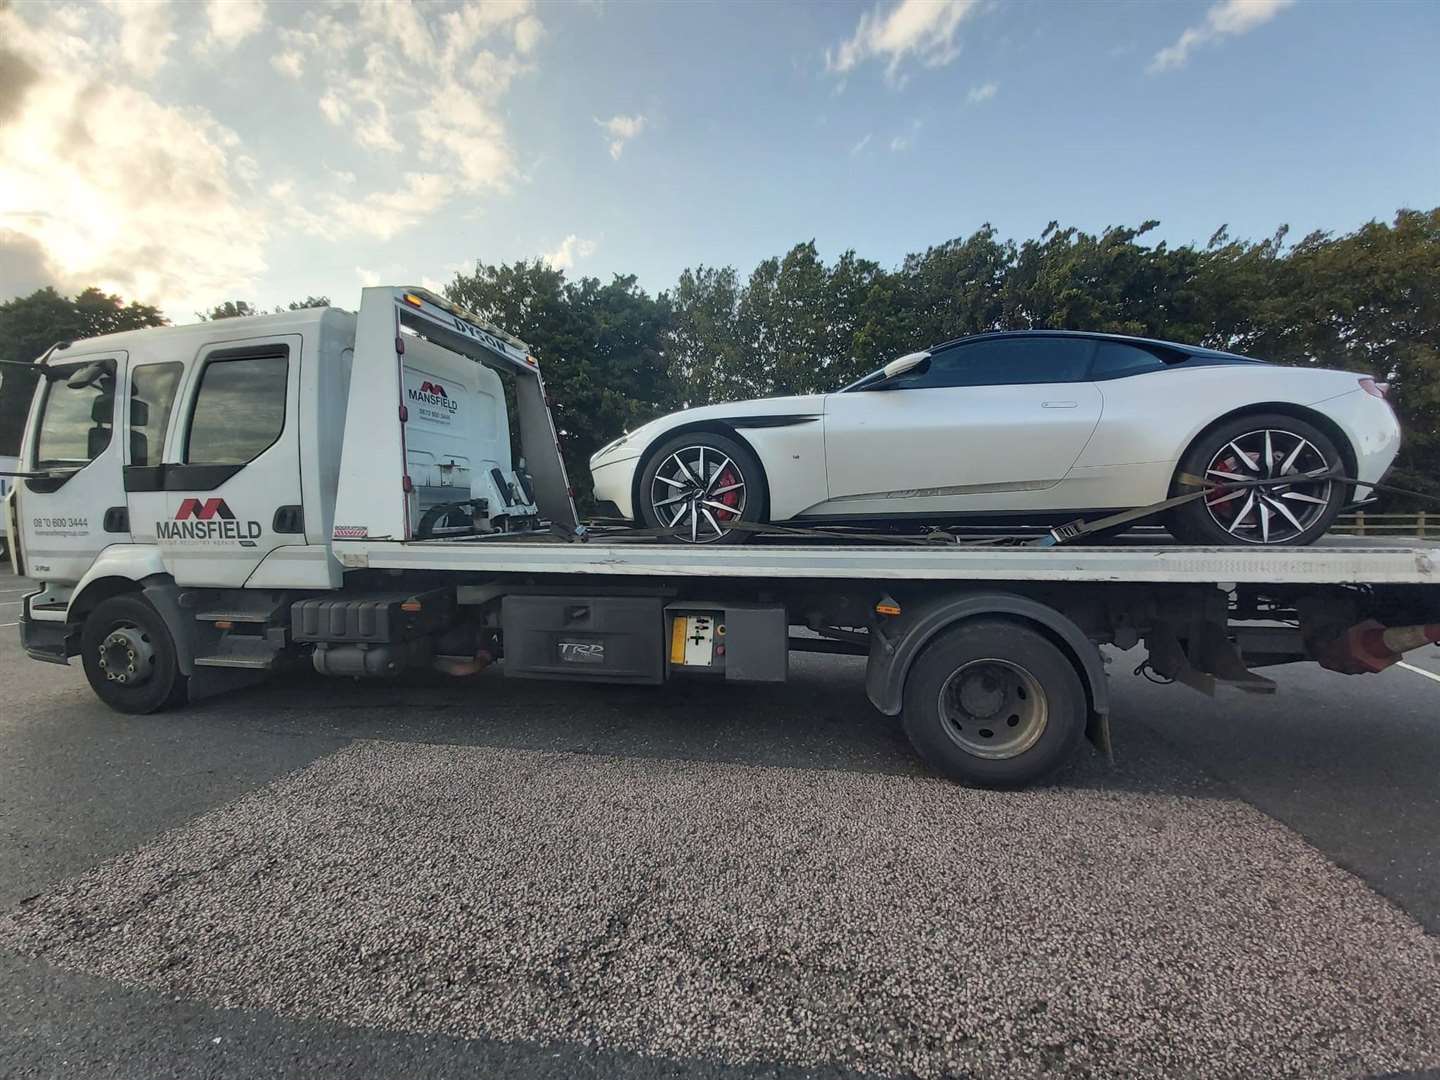 The Aston Martin DB11 was confiscated by police